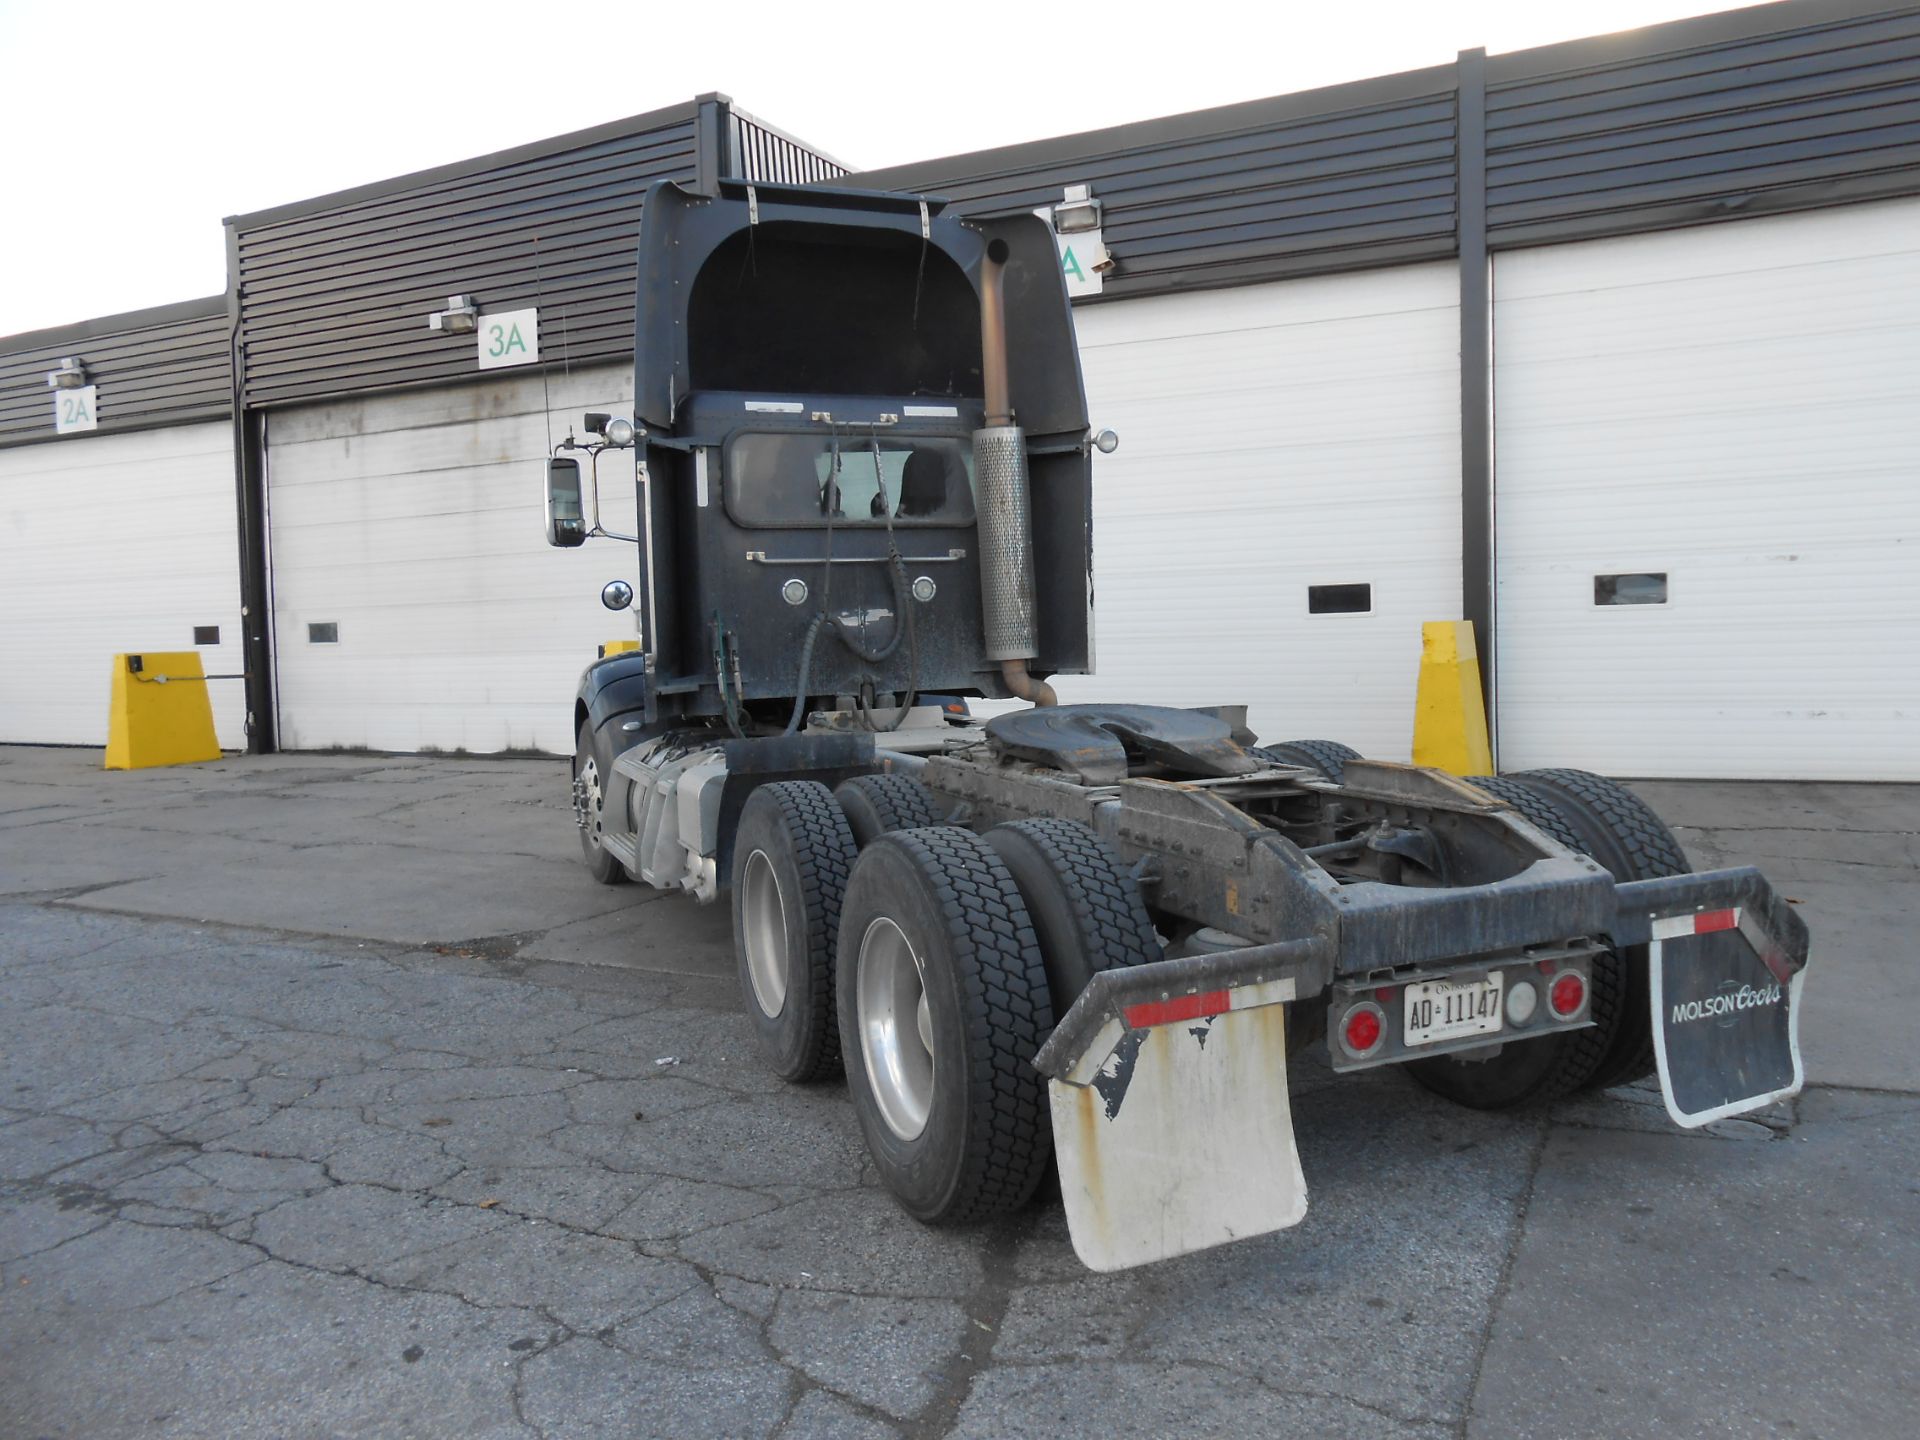 2011 Peterbilt 6X4 DAY CAB TRUCK, model 386 chassis 8070 kg weight with Cummins ISX15 485 diesel ( - Image 3 of 15